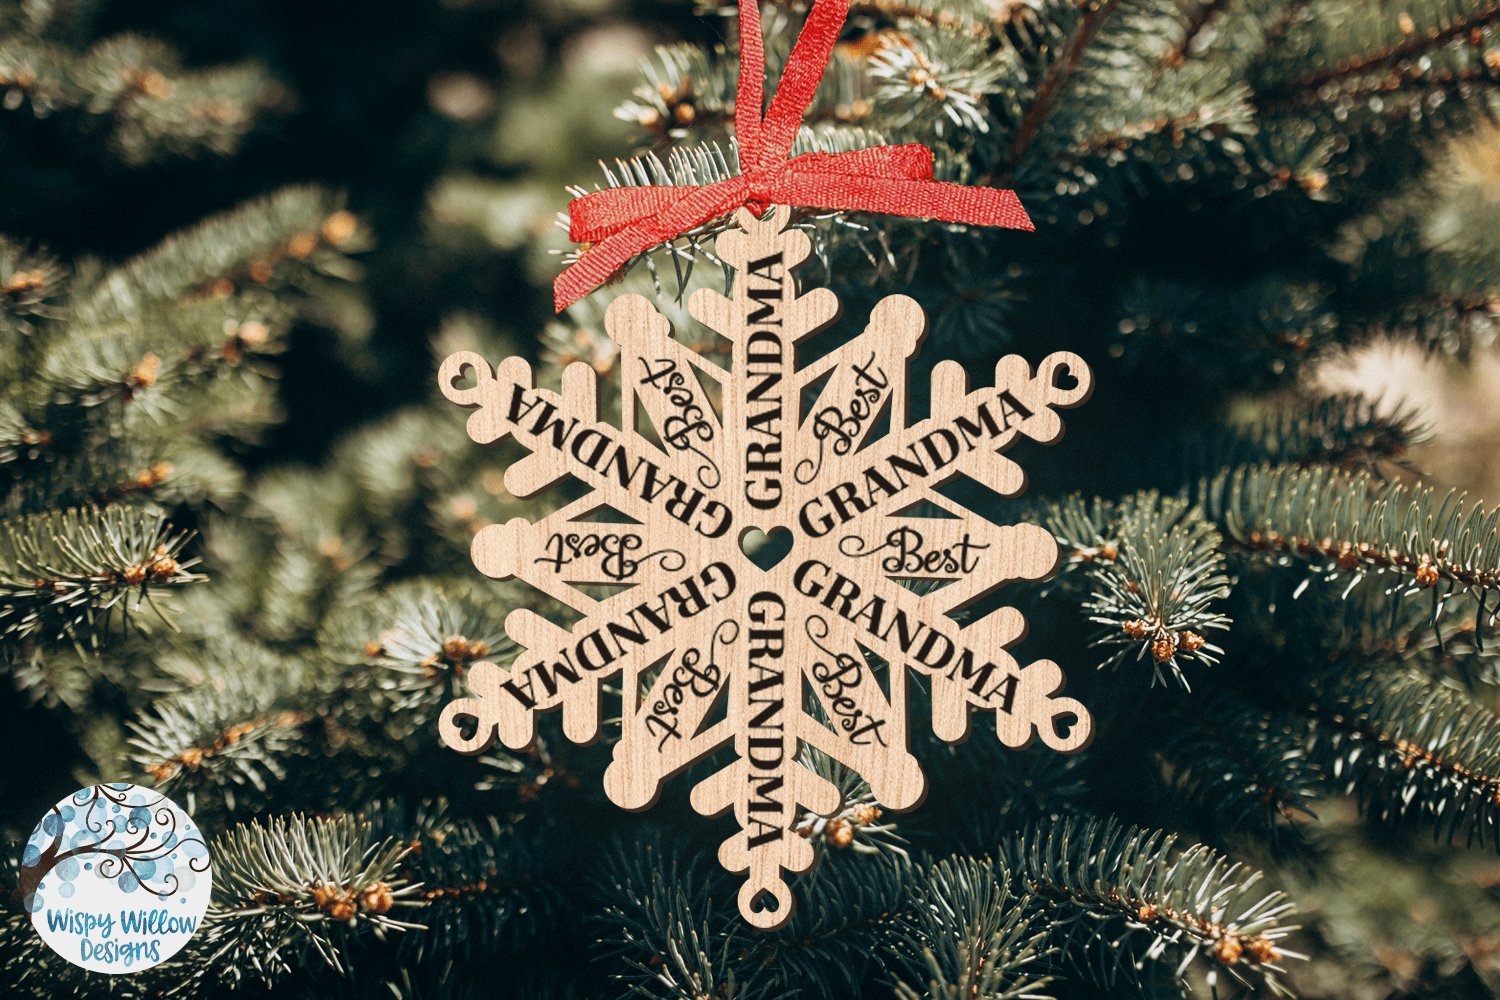 Best Grandma Snowflake Christmas Ornament for Glowforge or Laser Cutter Wispy Willow Designs Company